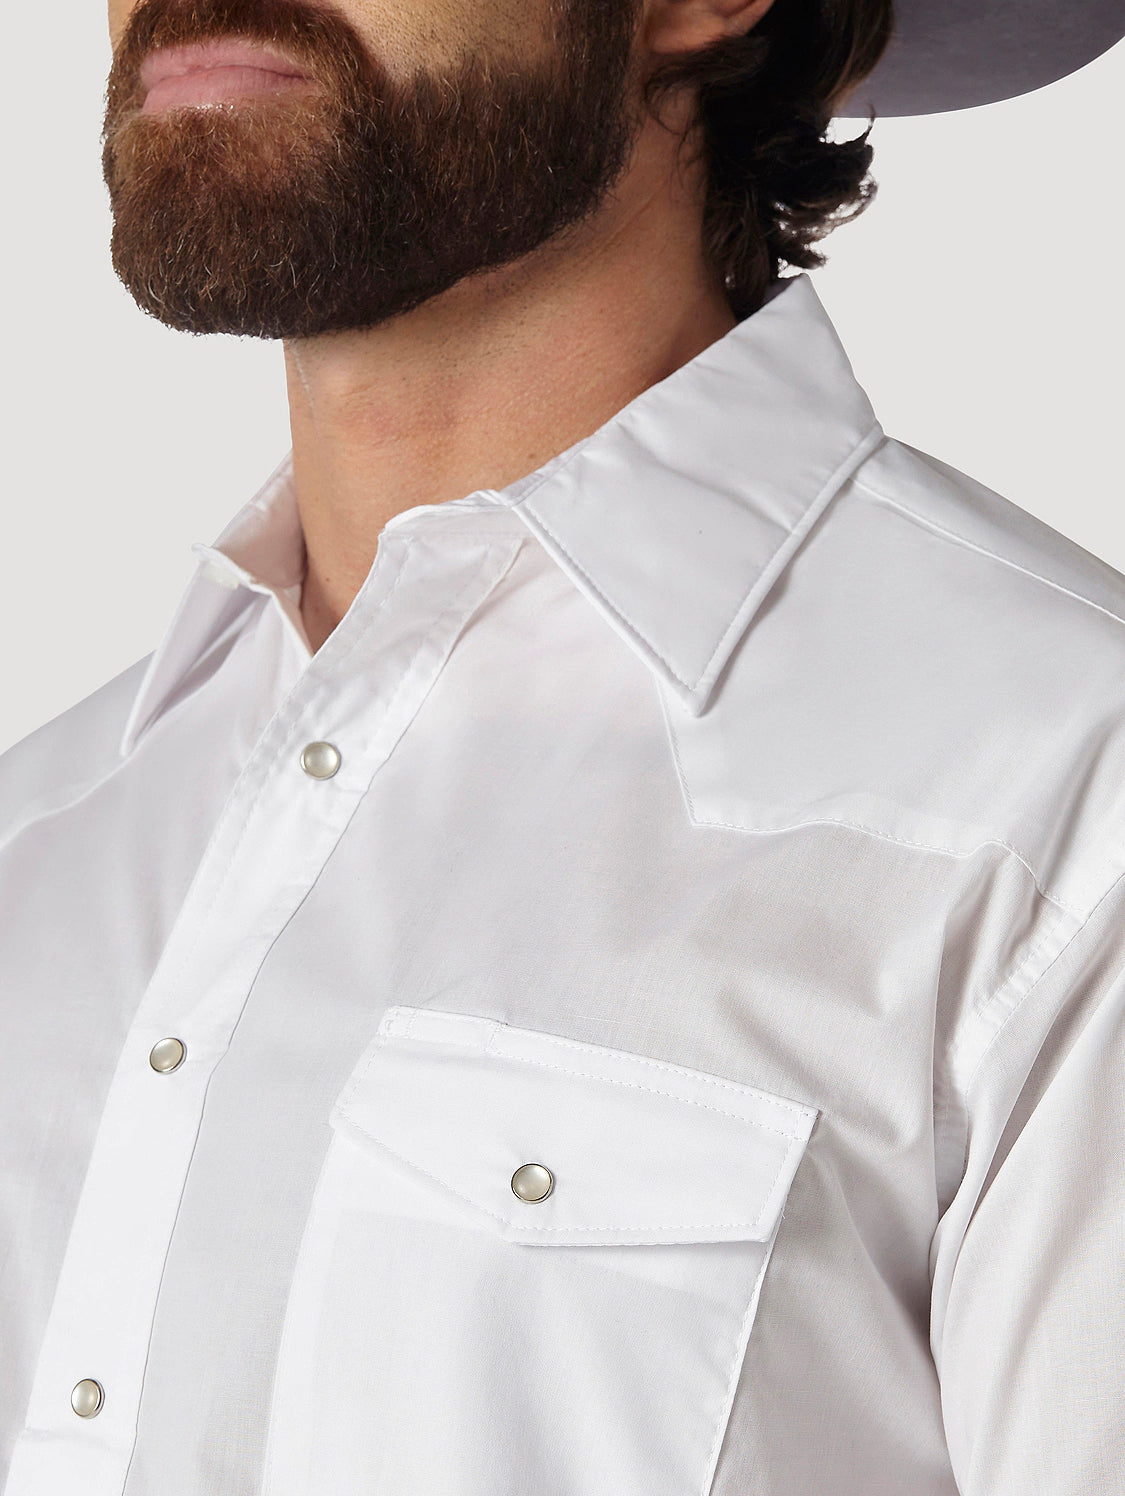 WRANGLER® WESTERN SNAP SHIRT - LONG SLEEVE SOLID BROADCLOTH IN WHITE